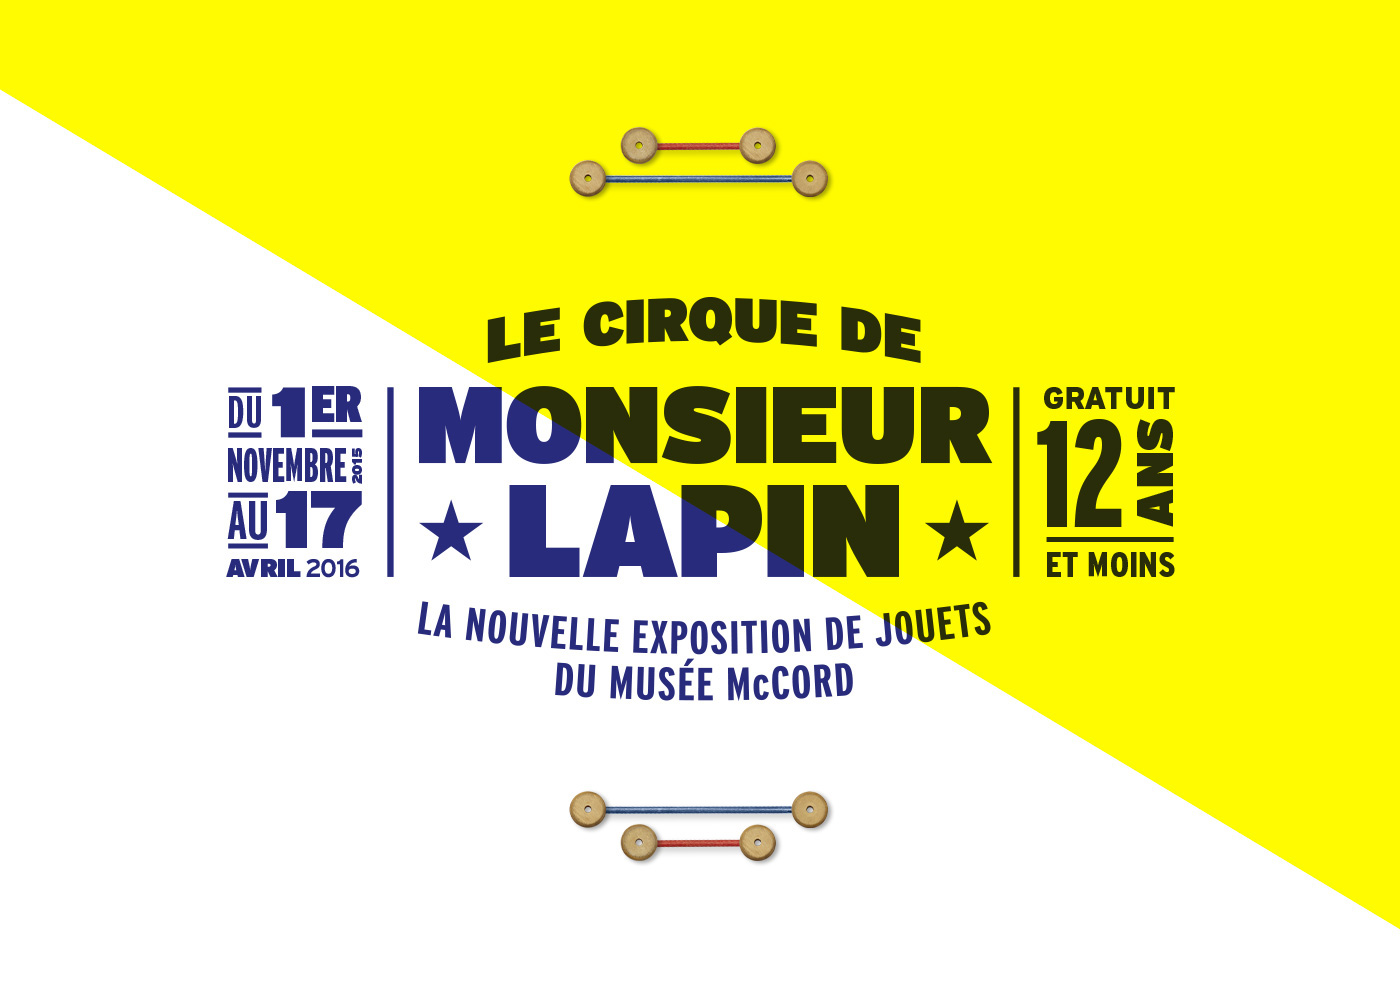 Typographie poster affiche typo mccord museum toys Exhibition  Circus cirque craft jouets lapin tickets